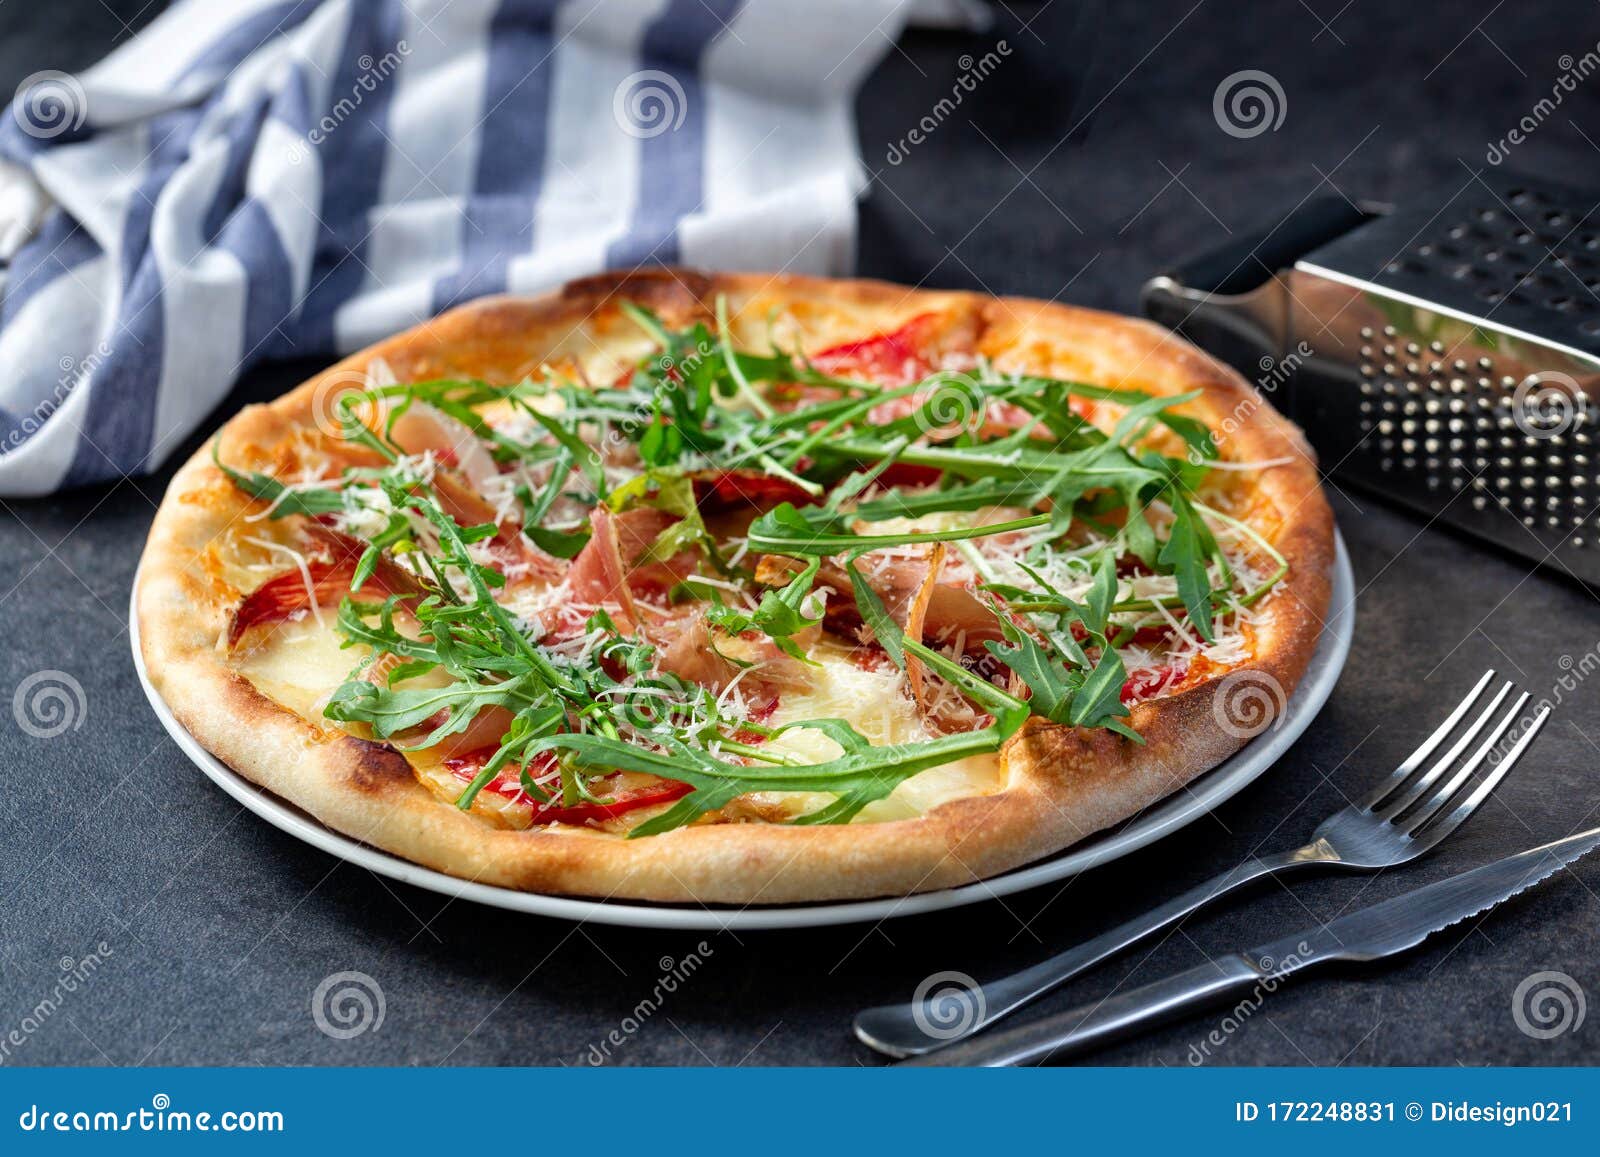 Yummy Pizza with Green Vegie Toppings Stock Image   Image of fried ...